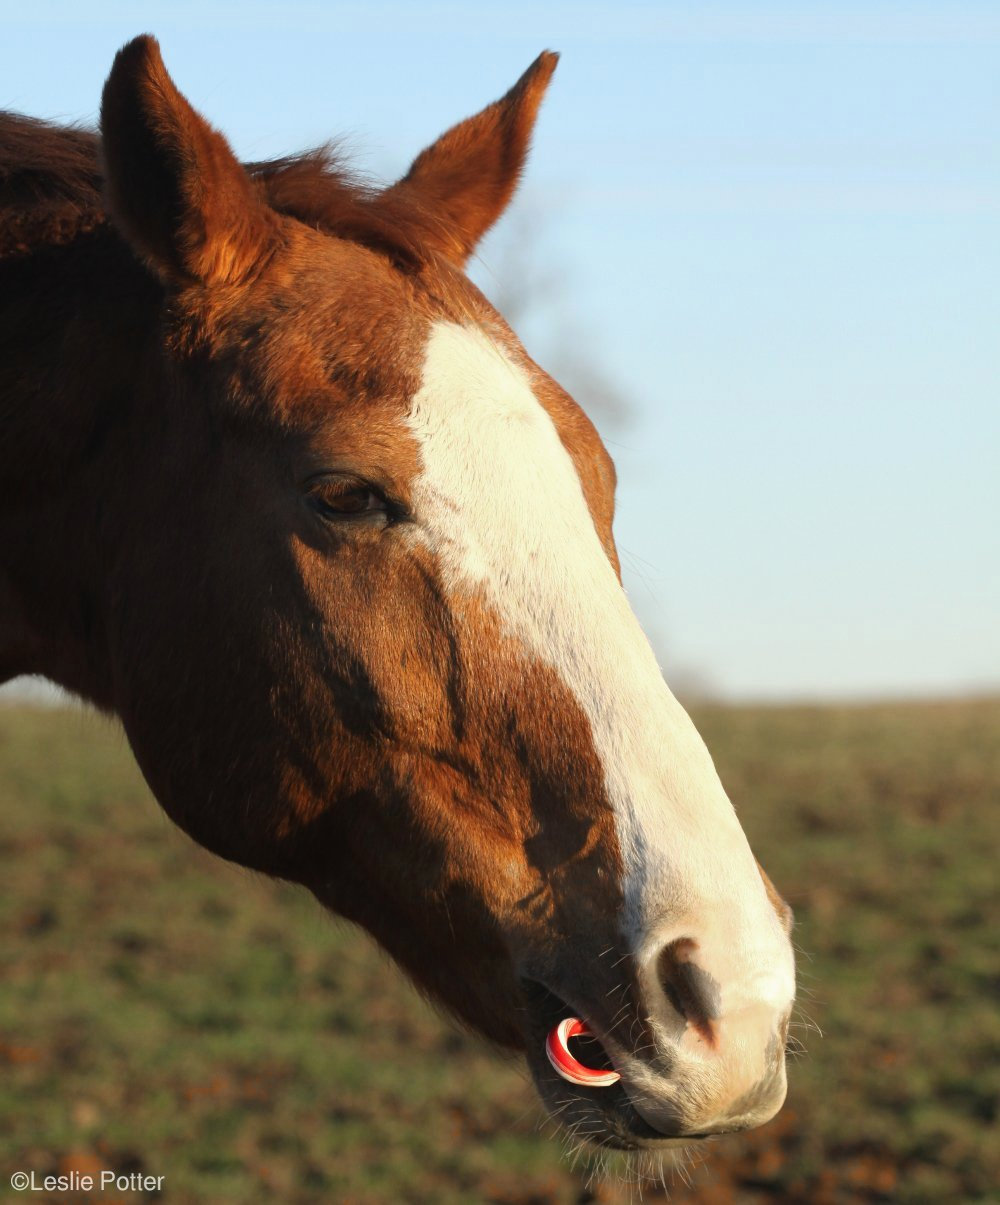 Horse eating candy as a sugar treat